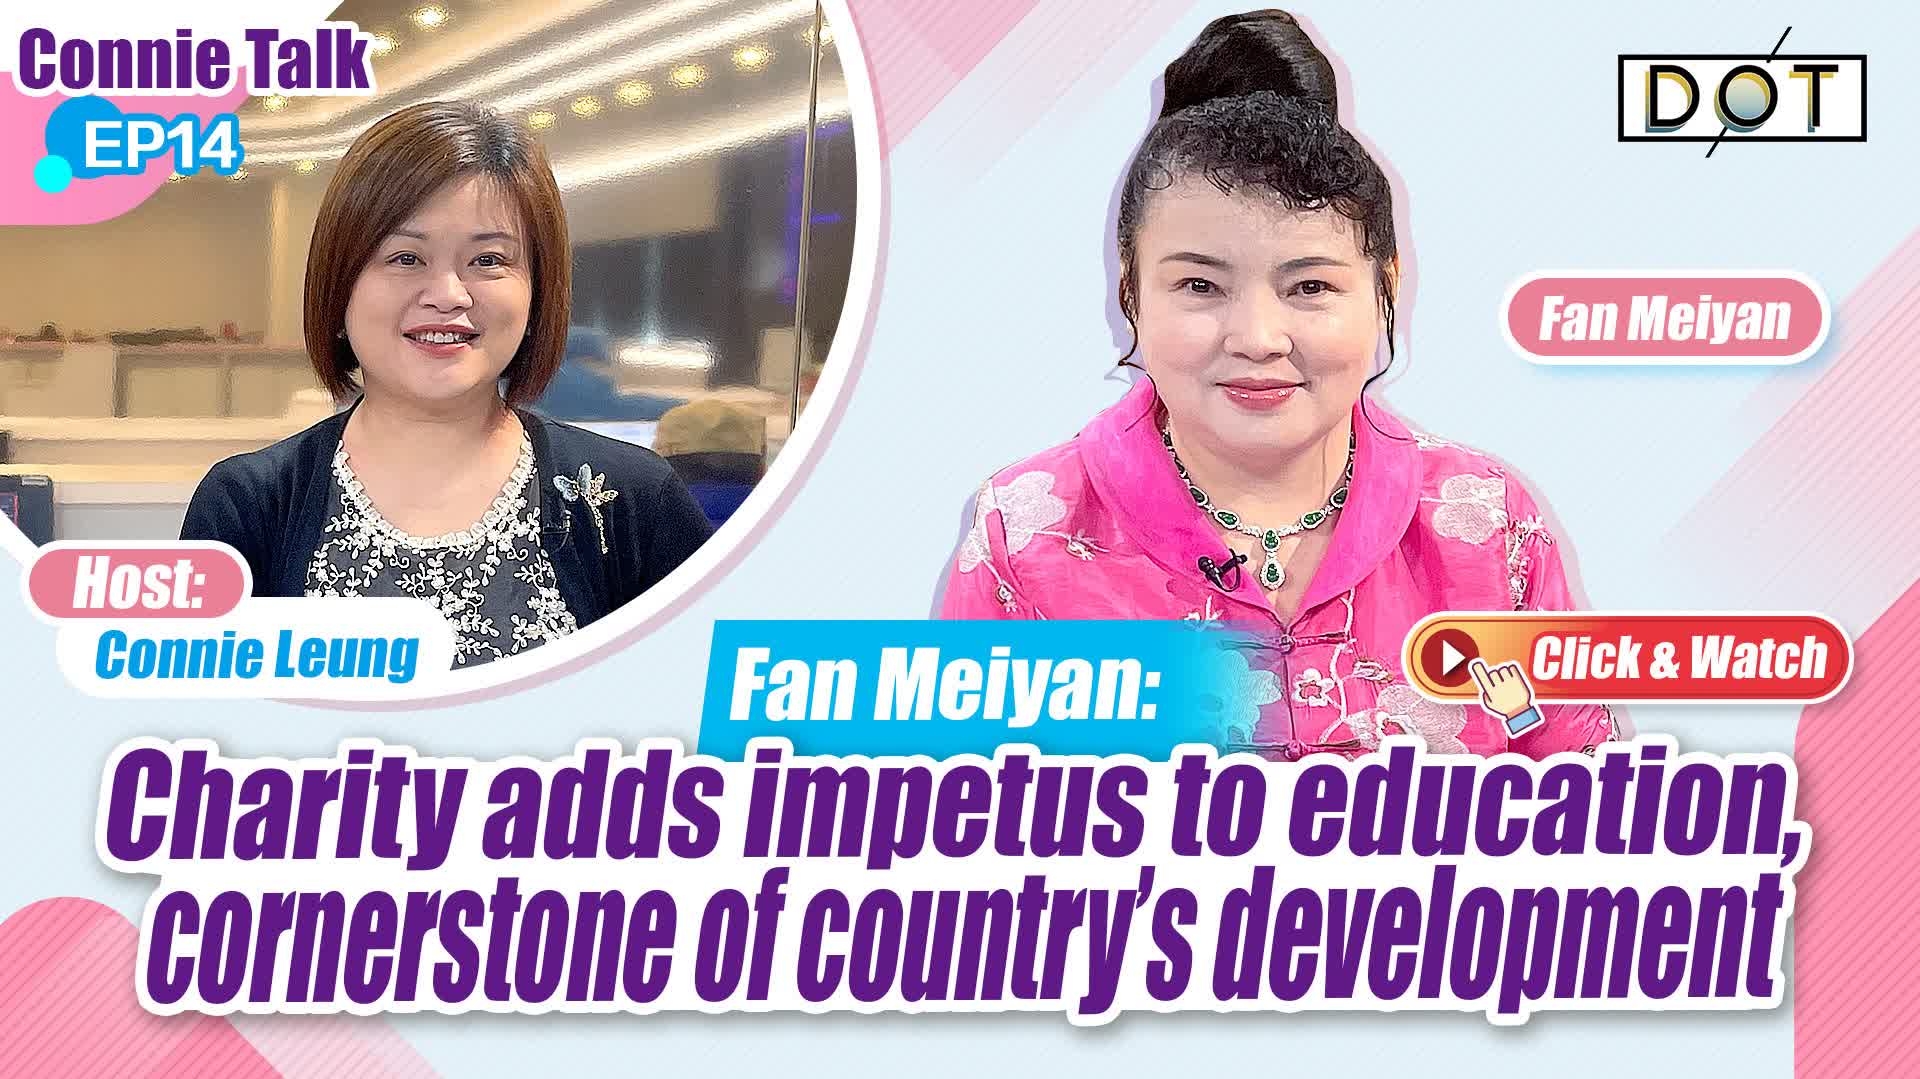 Connie Talk | Fan Meiyan: Charity adds impetus to education, cornerstone of country's development